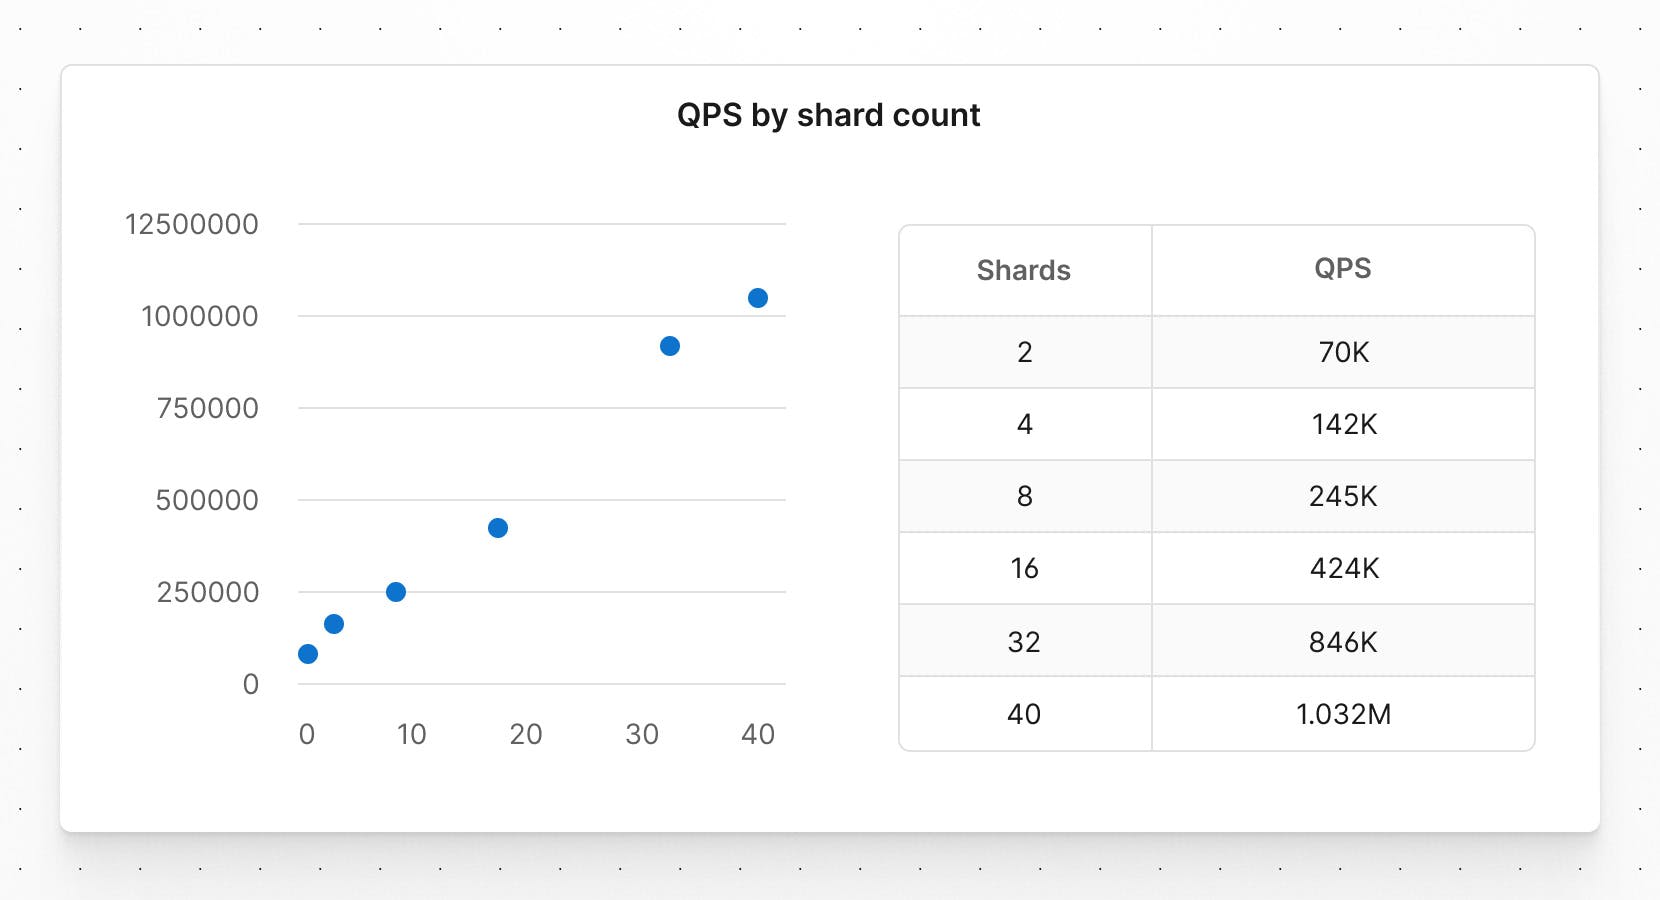 Graph showing QPS by shard count where QPS increases at roughly the same rate shards increase